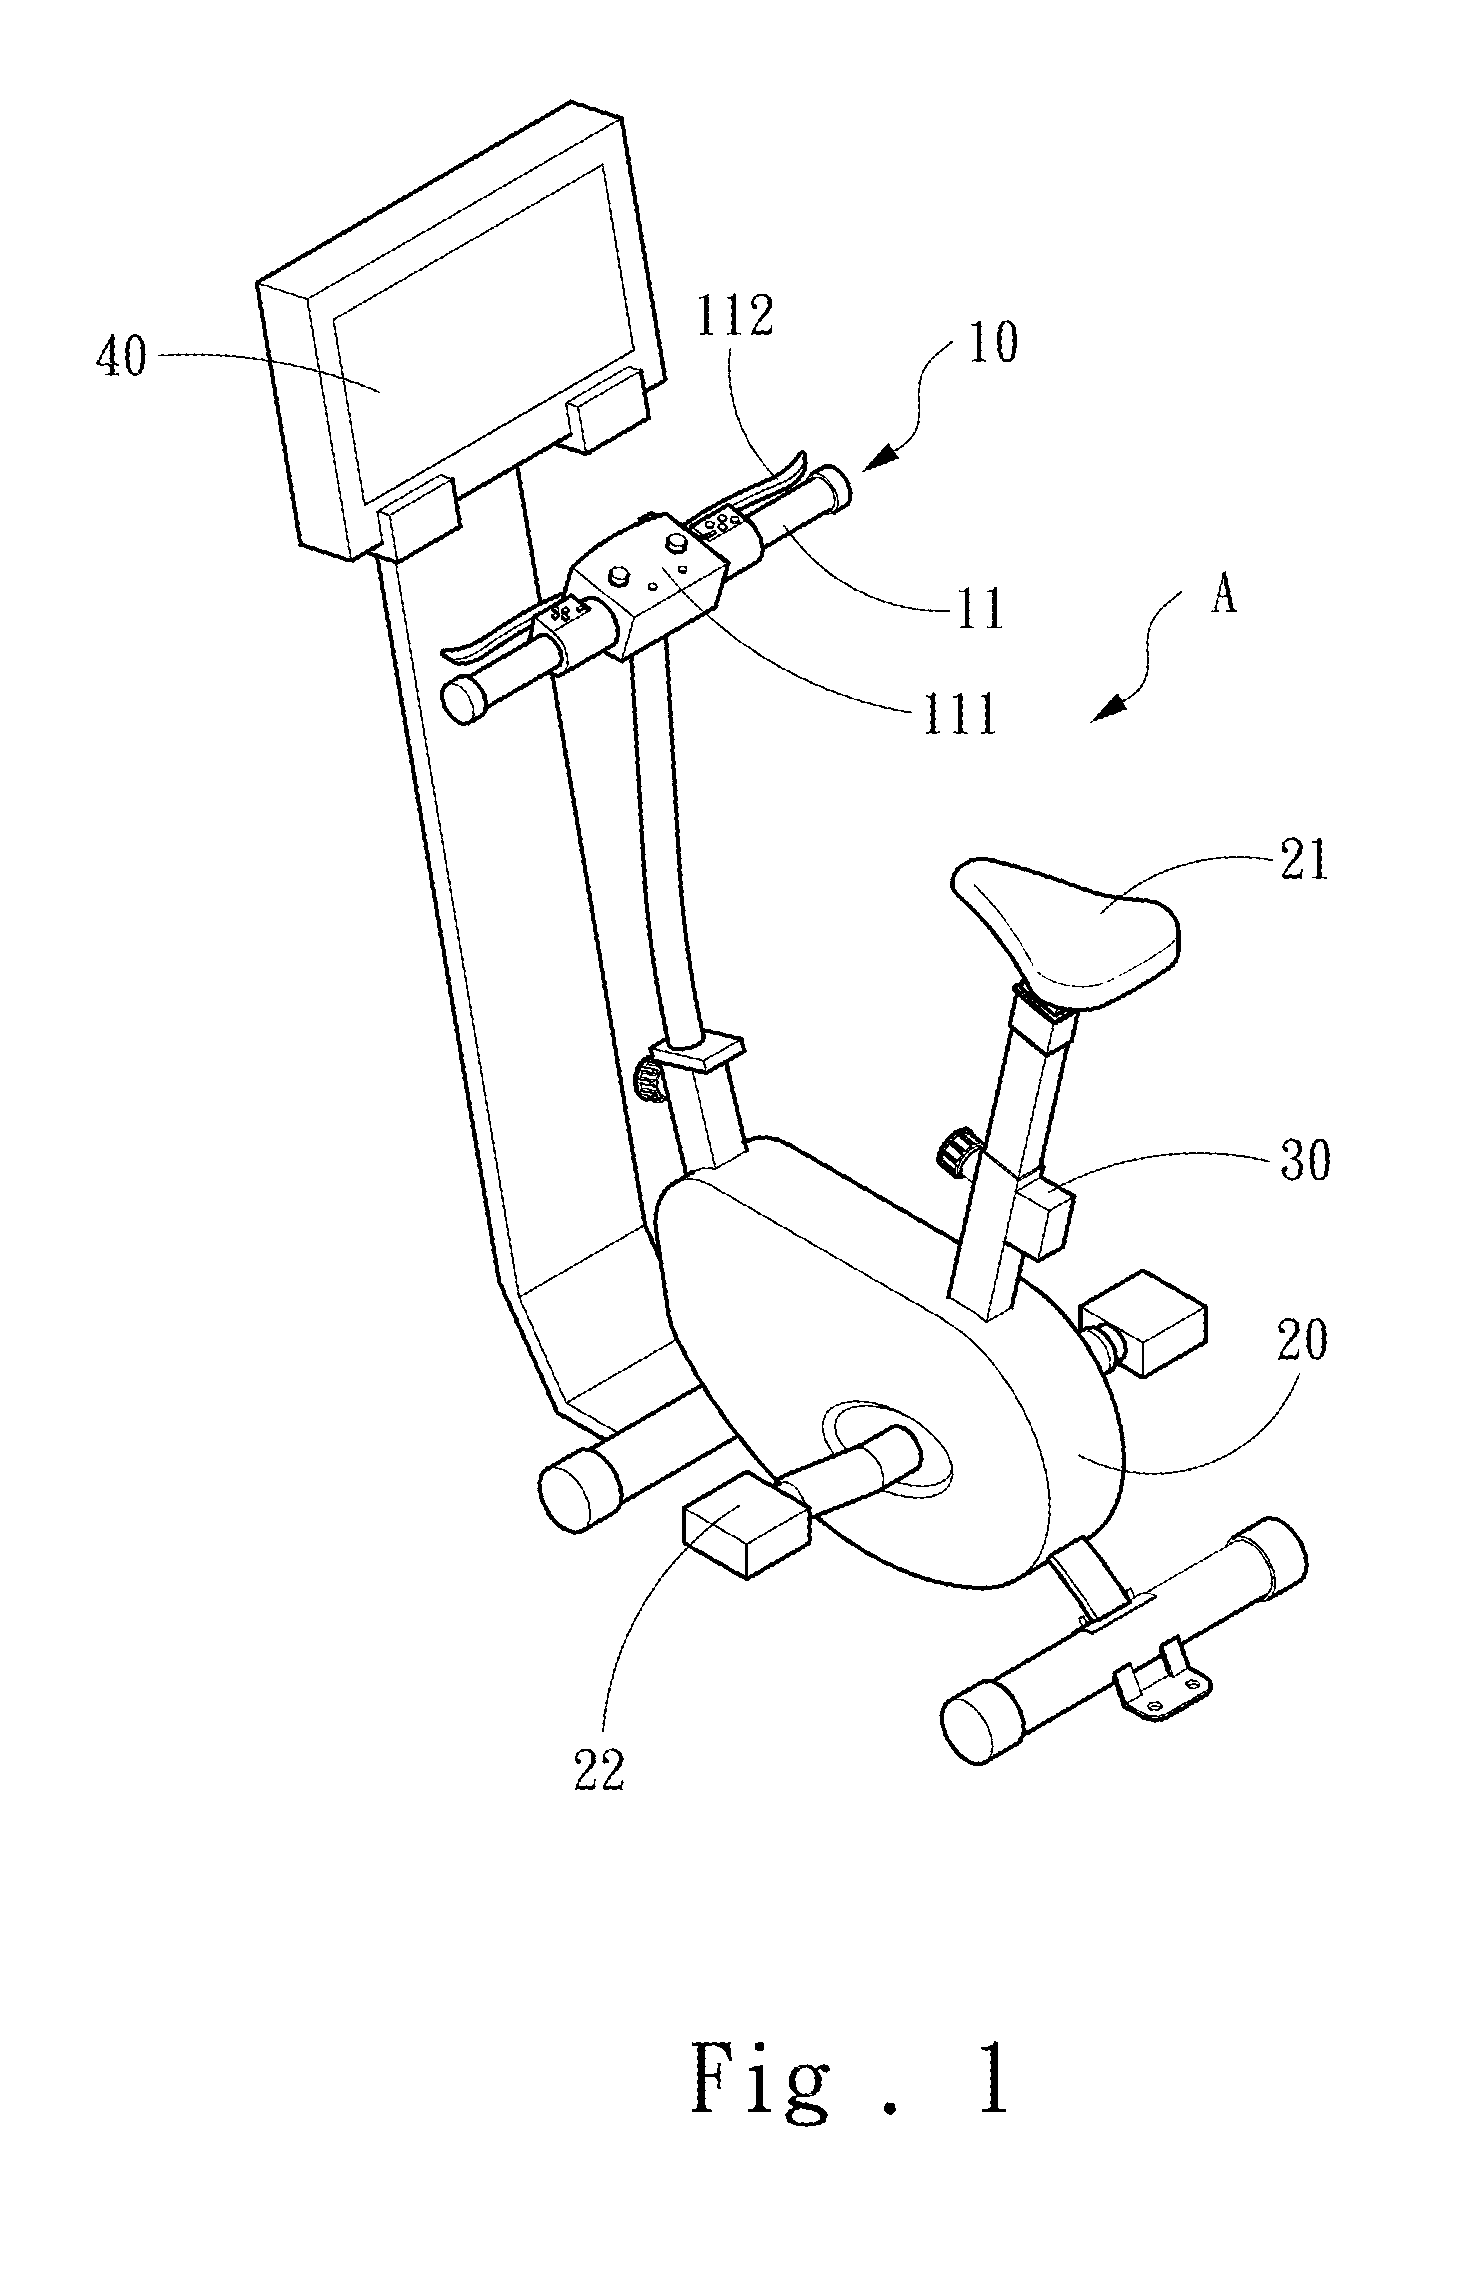 Fitness equipment combining with a cloud service system